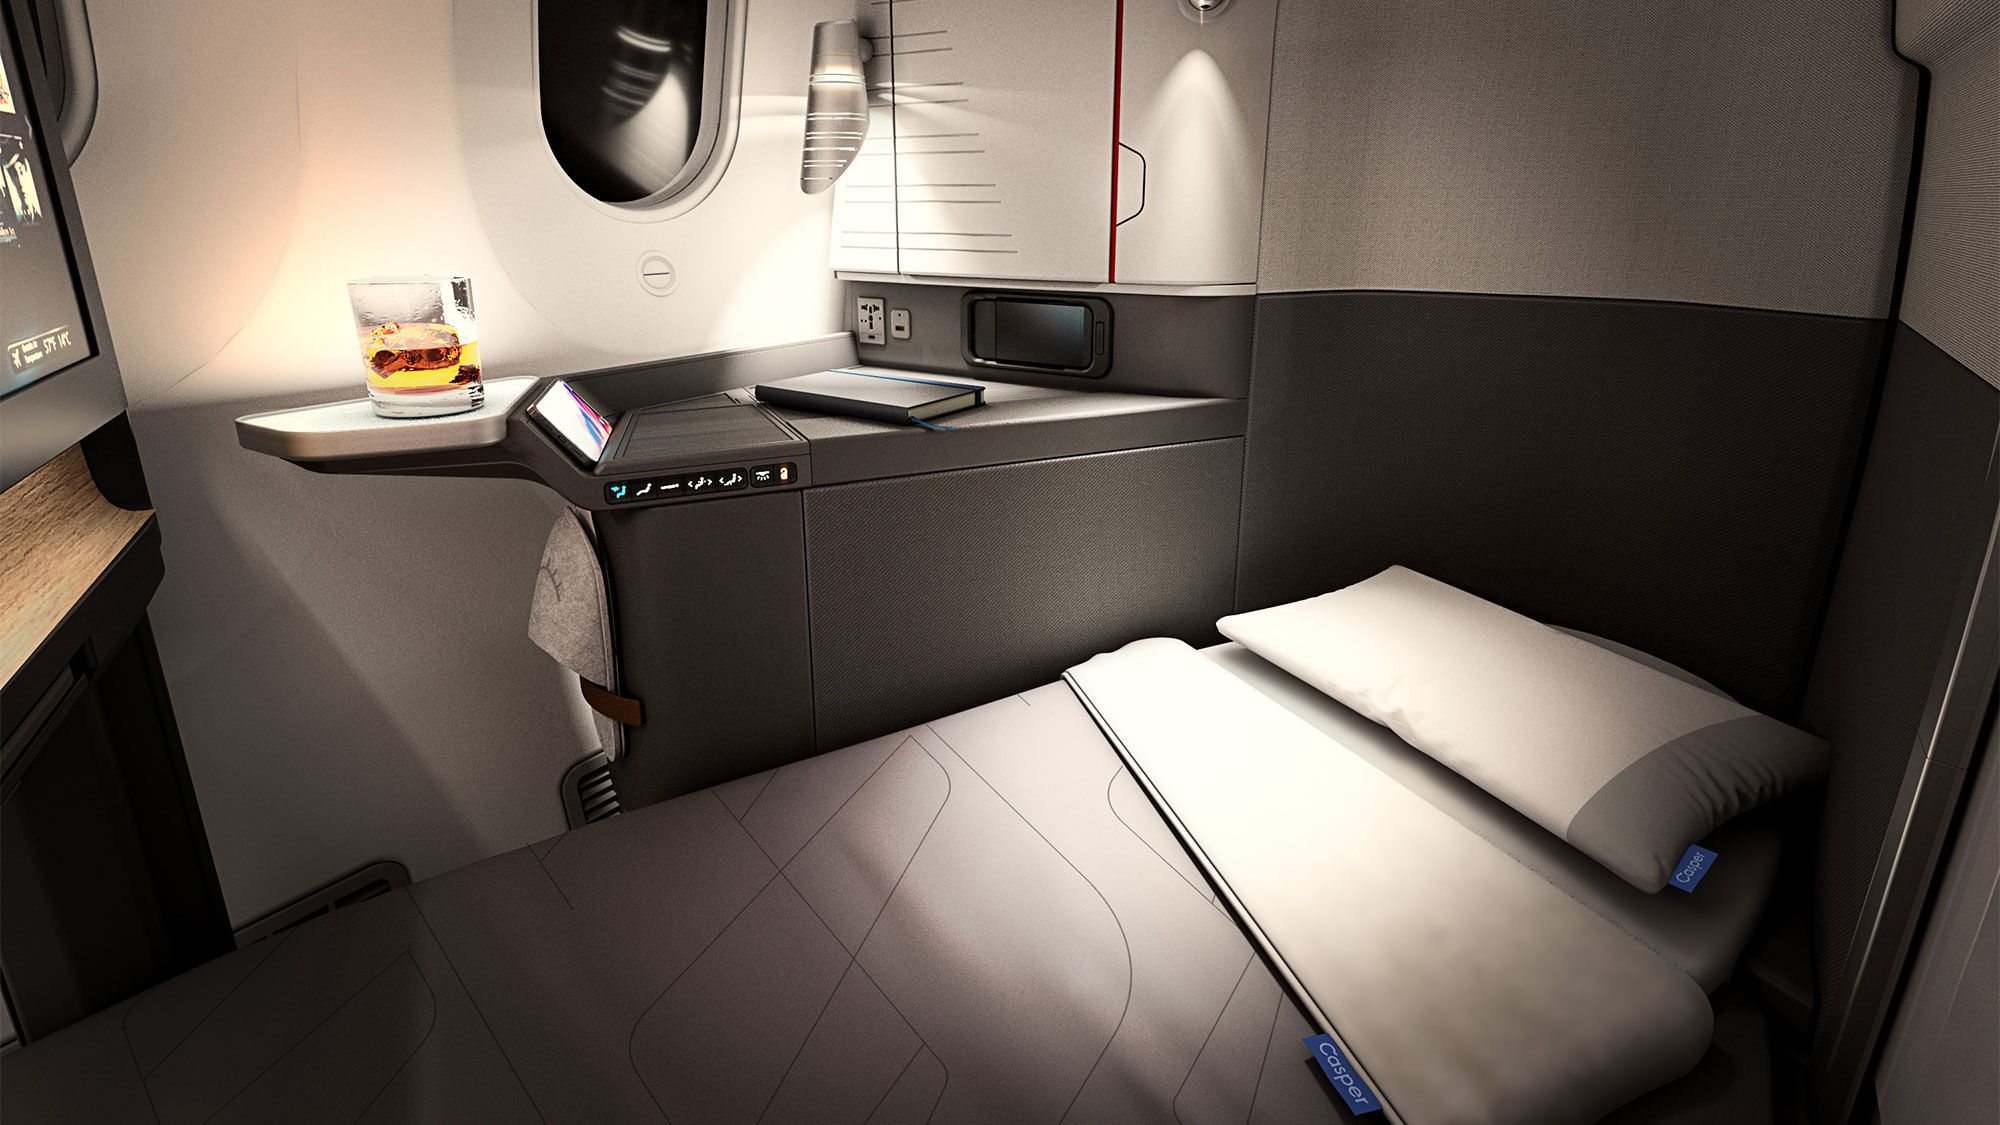 American Airlines' new cabin configurations target premium flyers